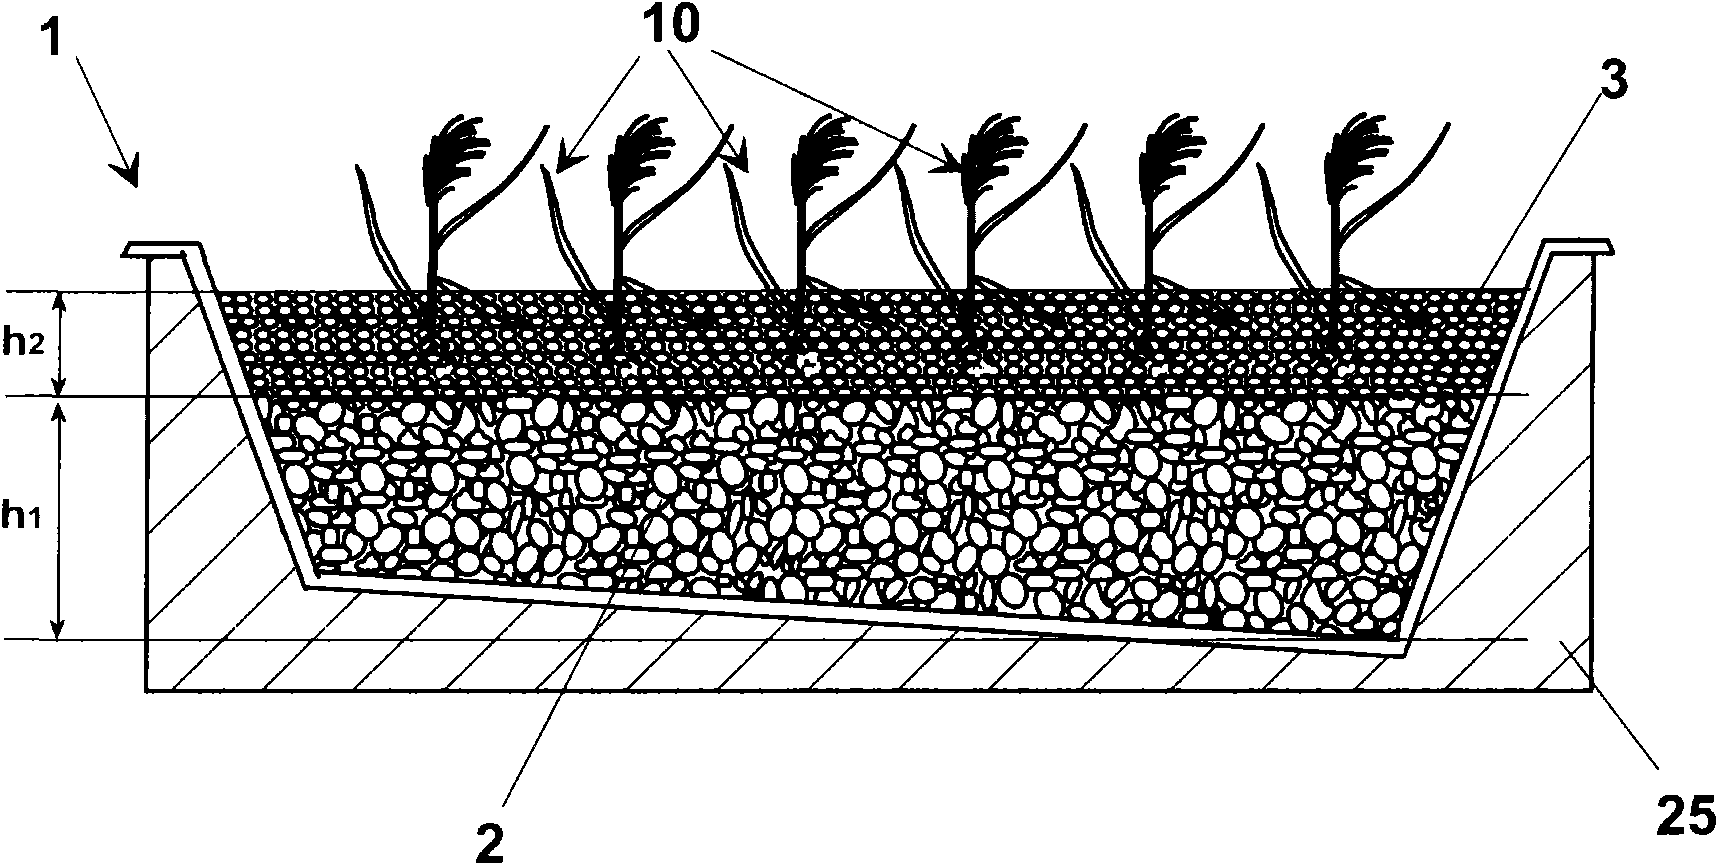 Process for biostabilization and humification of biological sludge in planted filtering beds